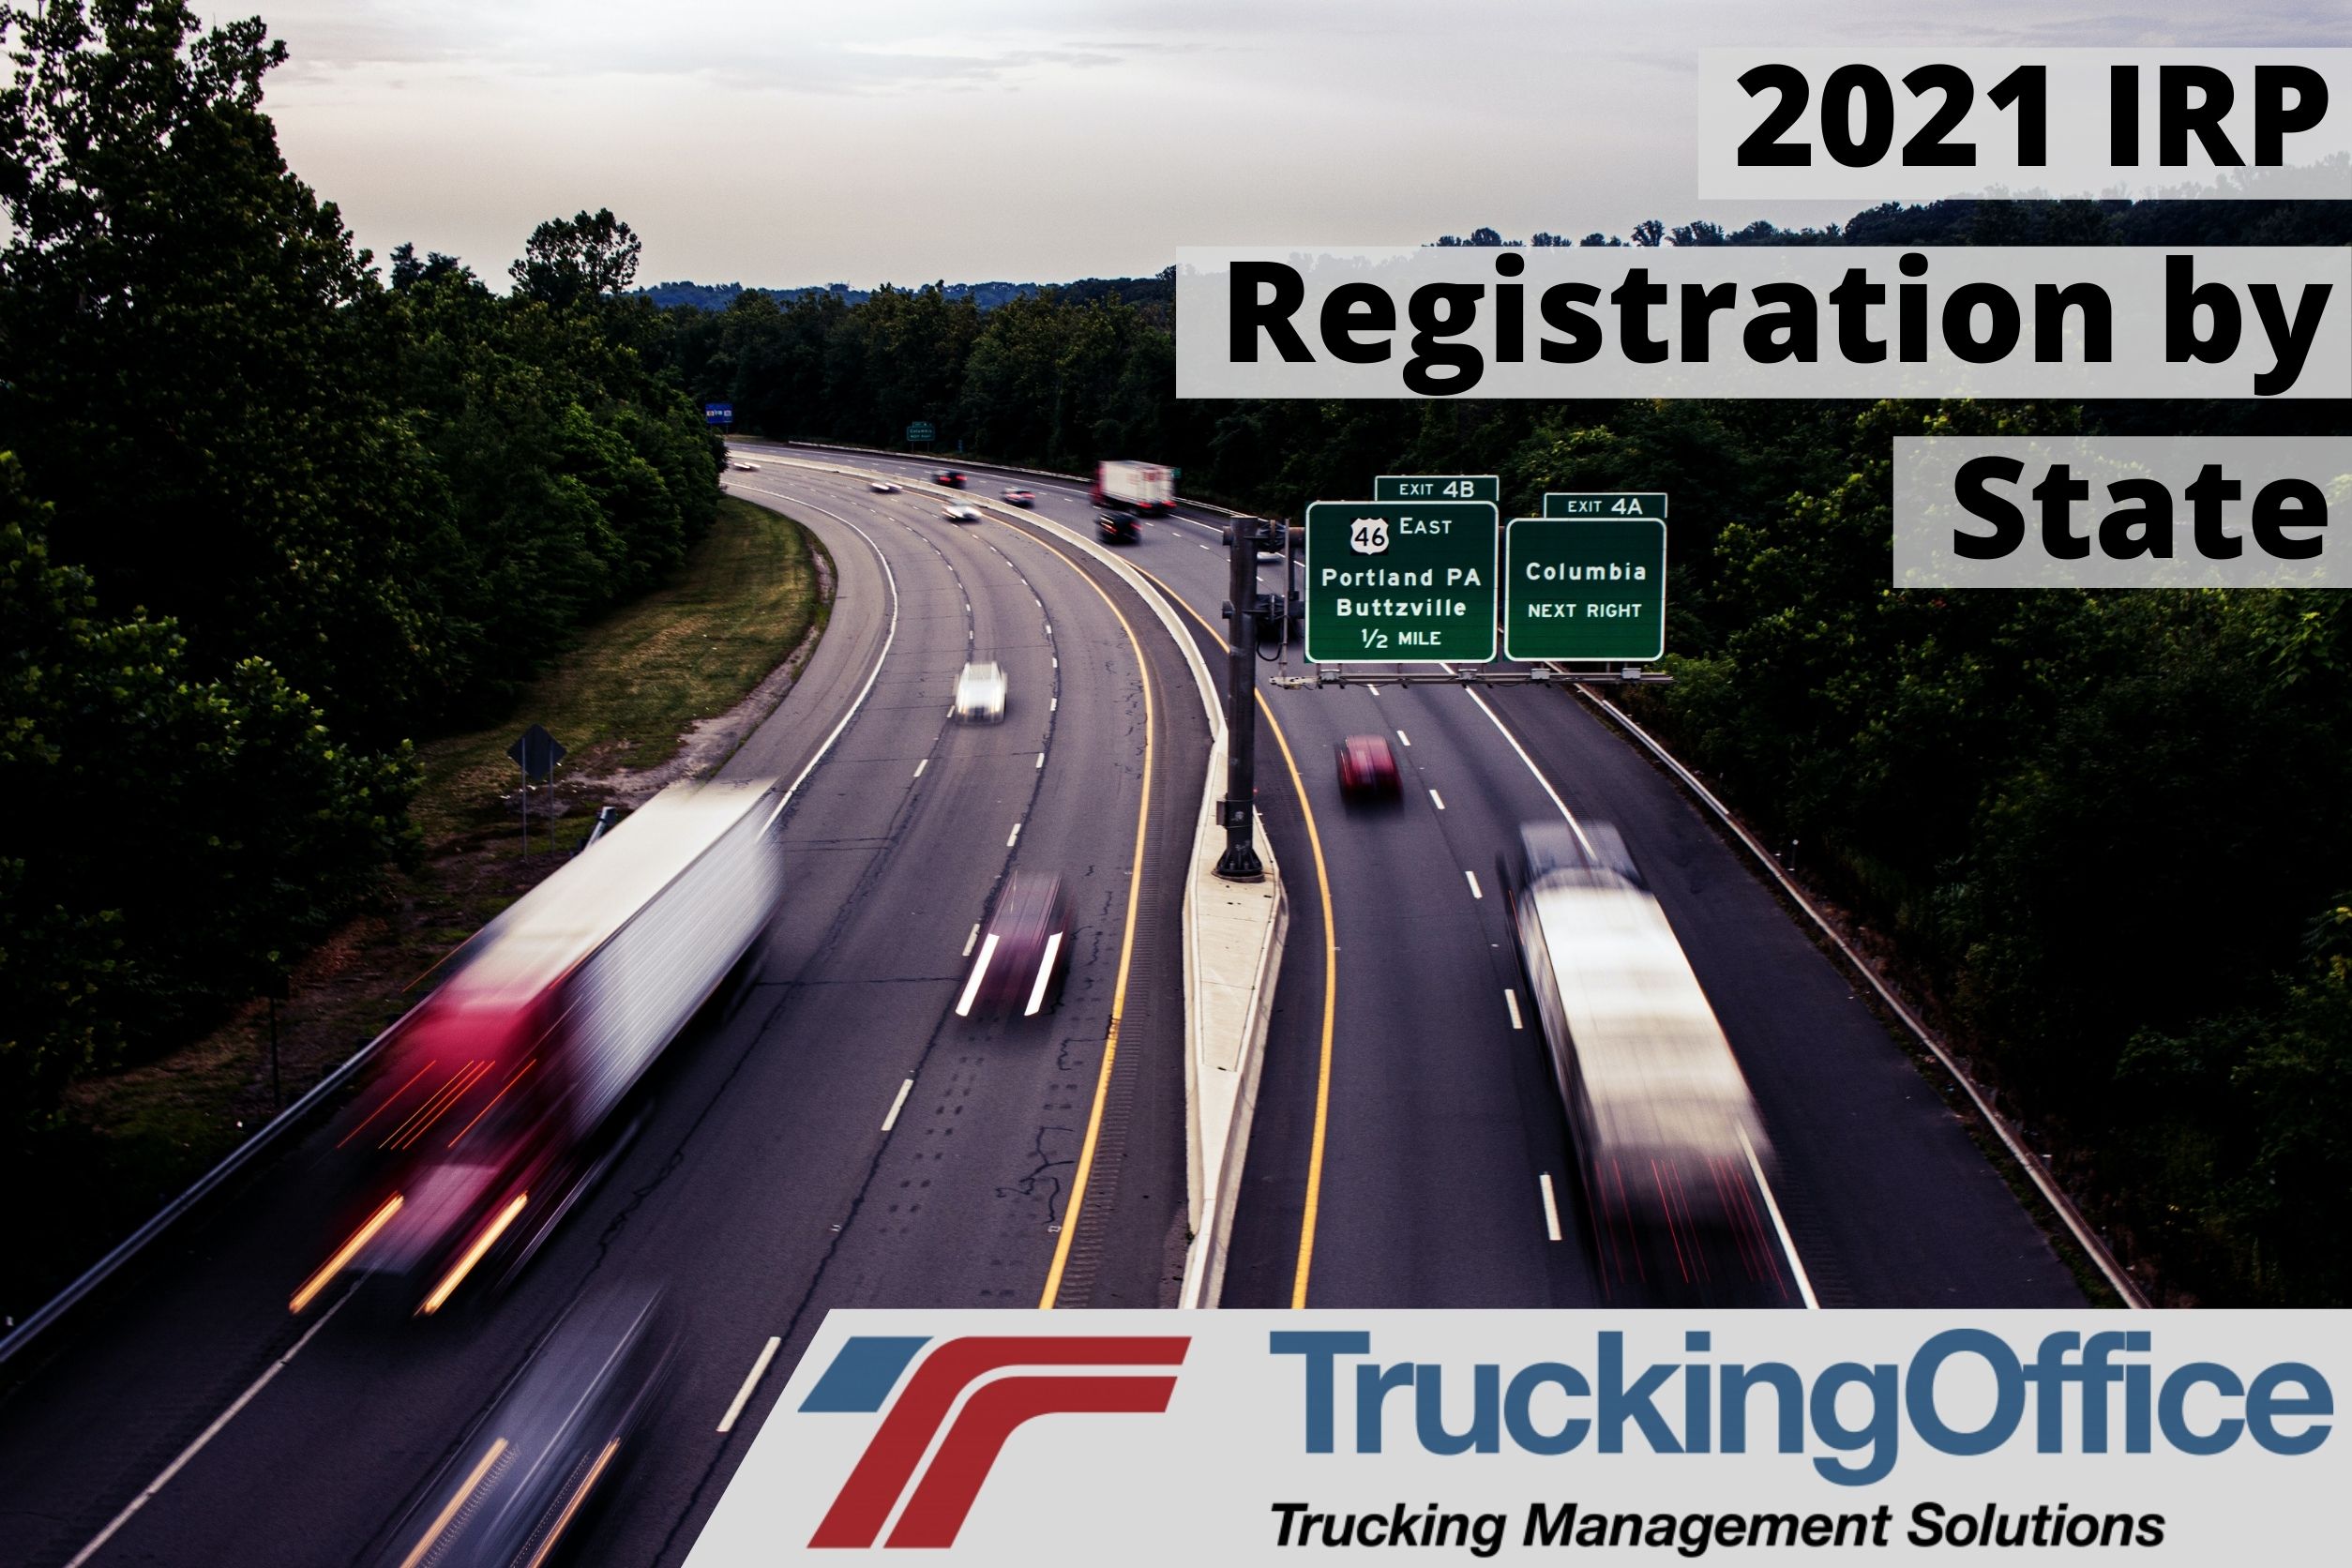 2021 IRP Registration by State